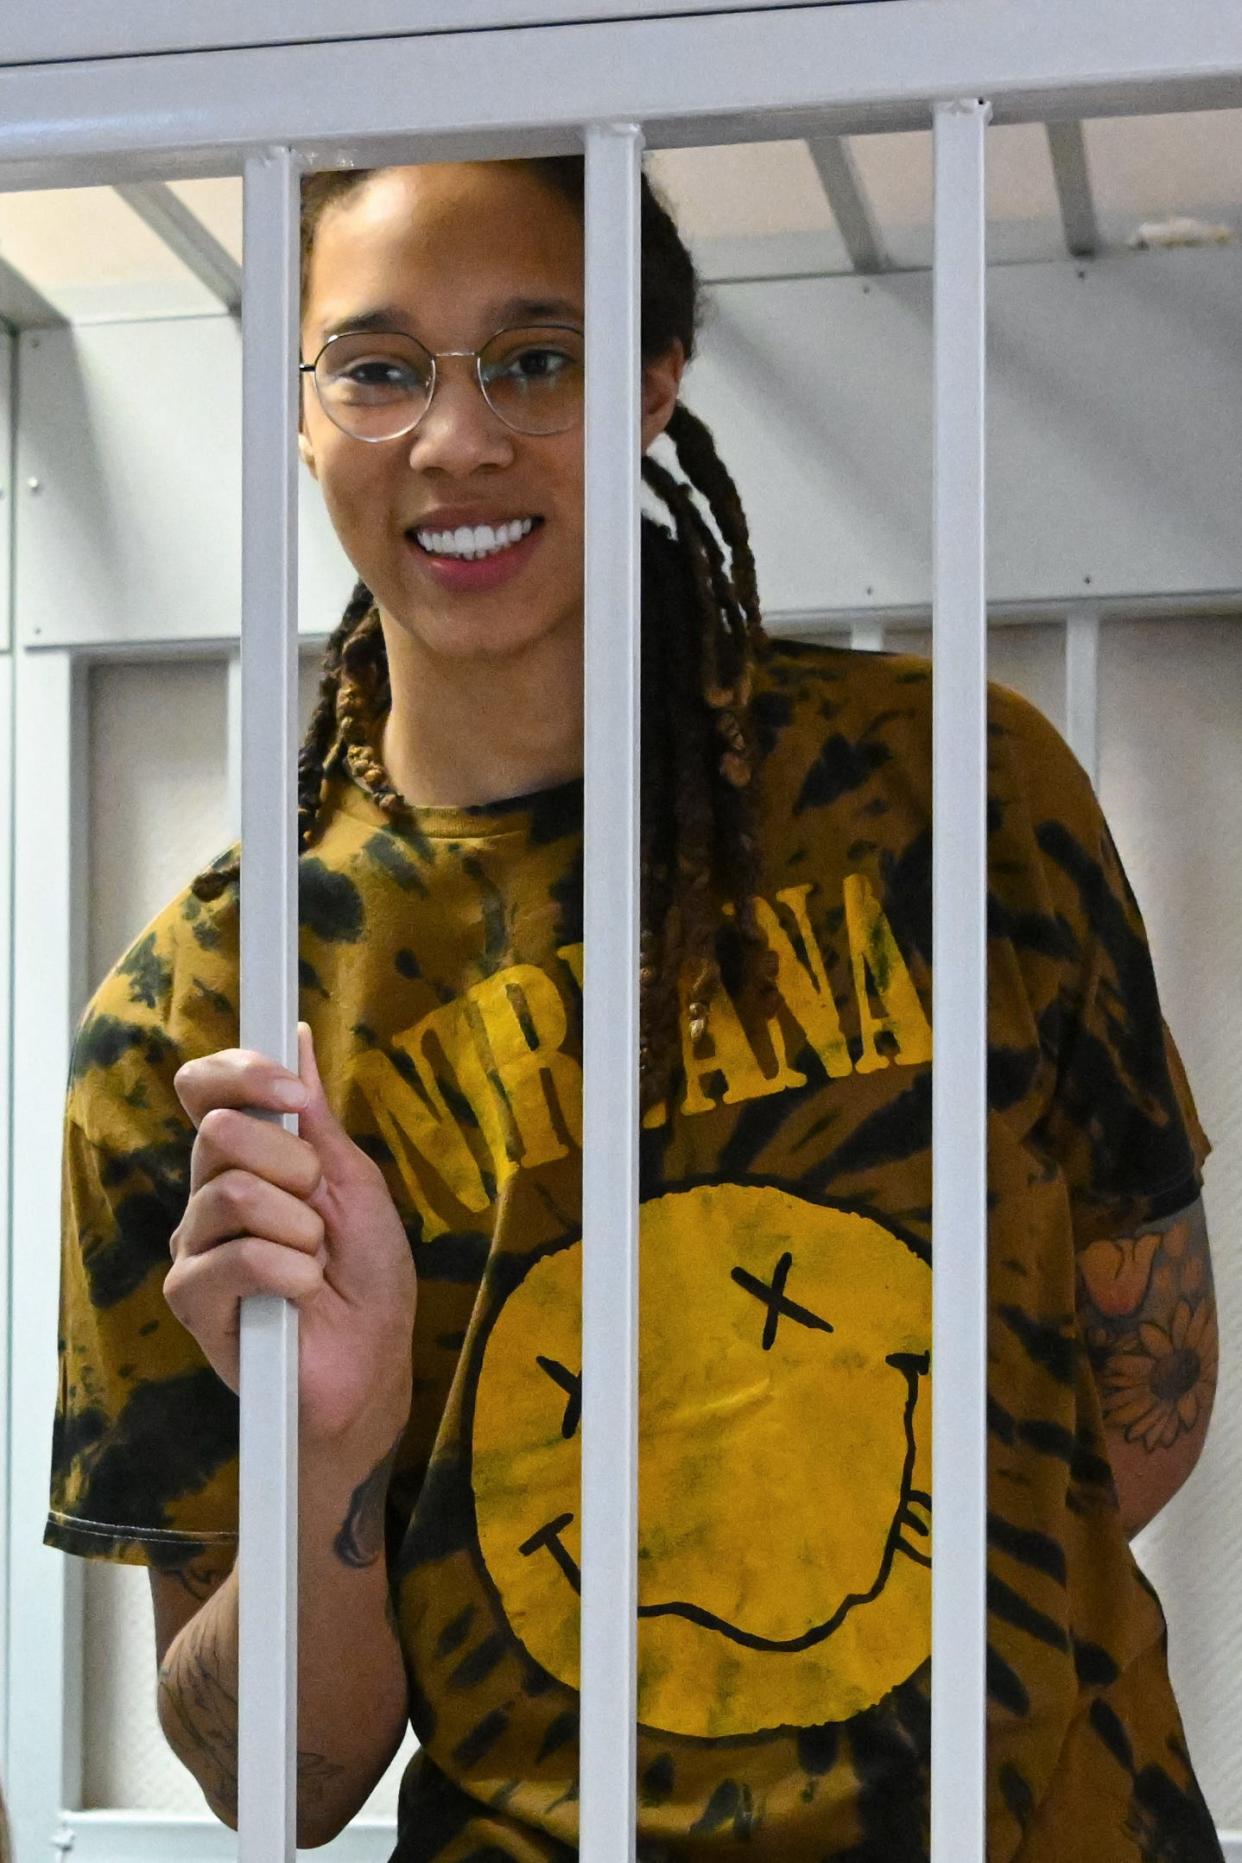 Brittney Griner smiles inside a defendants' cage during a July 2022 hearing at the Khimki Court in the town of Khimki outside Moscow.